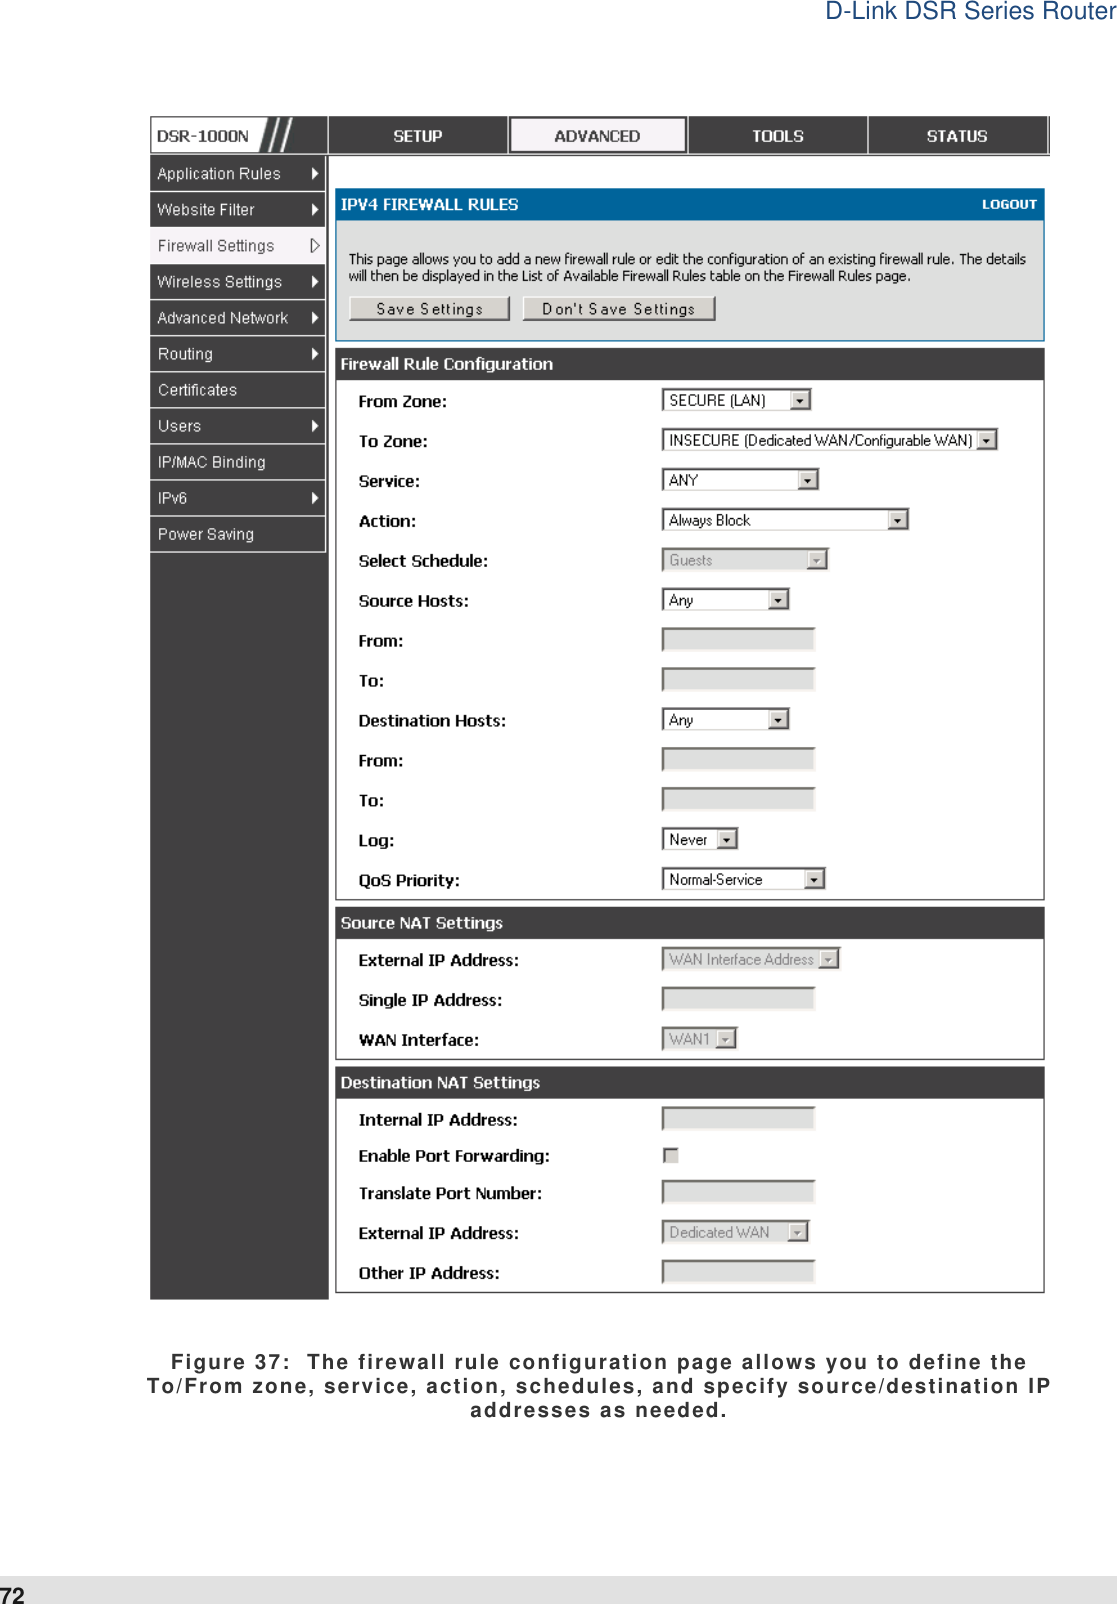 D-Link DSR Series Router 72  Figure 37:  The firewall rule configuration page allows you to define the To/From zone, service, action, schedules, and specify source/destination IP addresses as needed. 